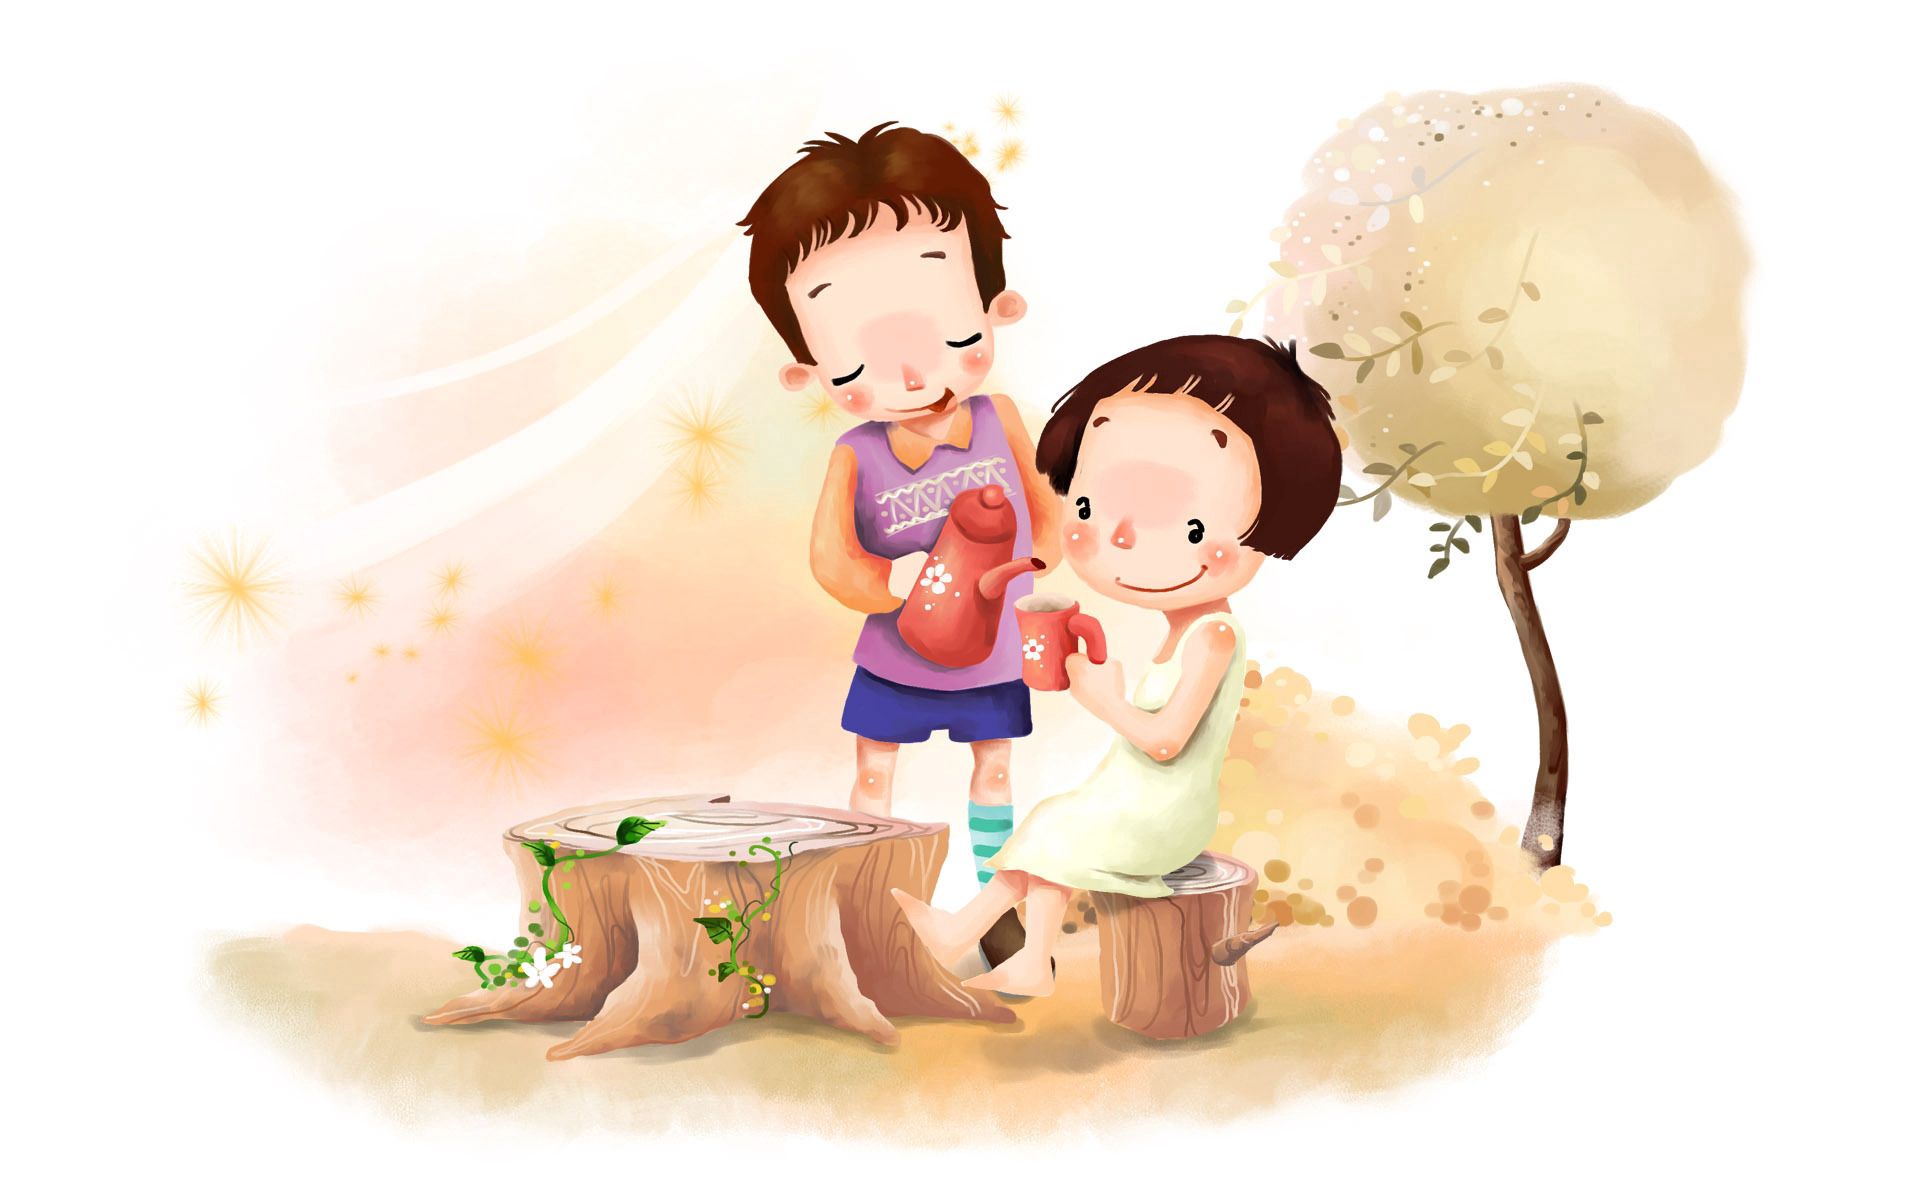 flowers, miscellanea, miscellaneous, wood, tree, picture, drawing, girl, foliage, positive, polyana, glade, wind, tea drinking, tea party, boy, childhood